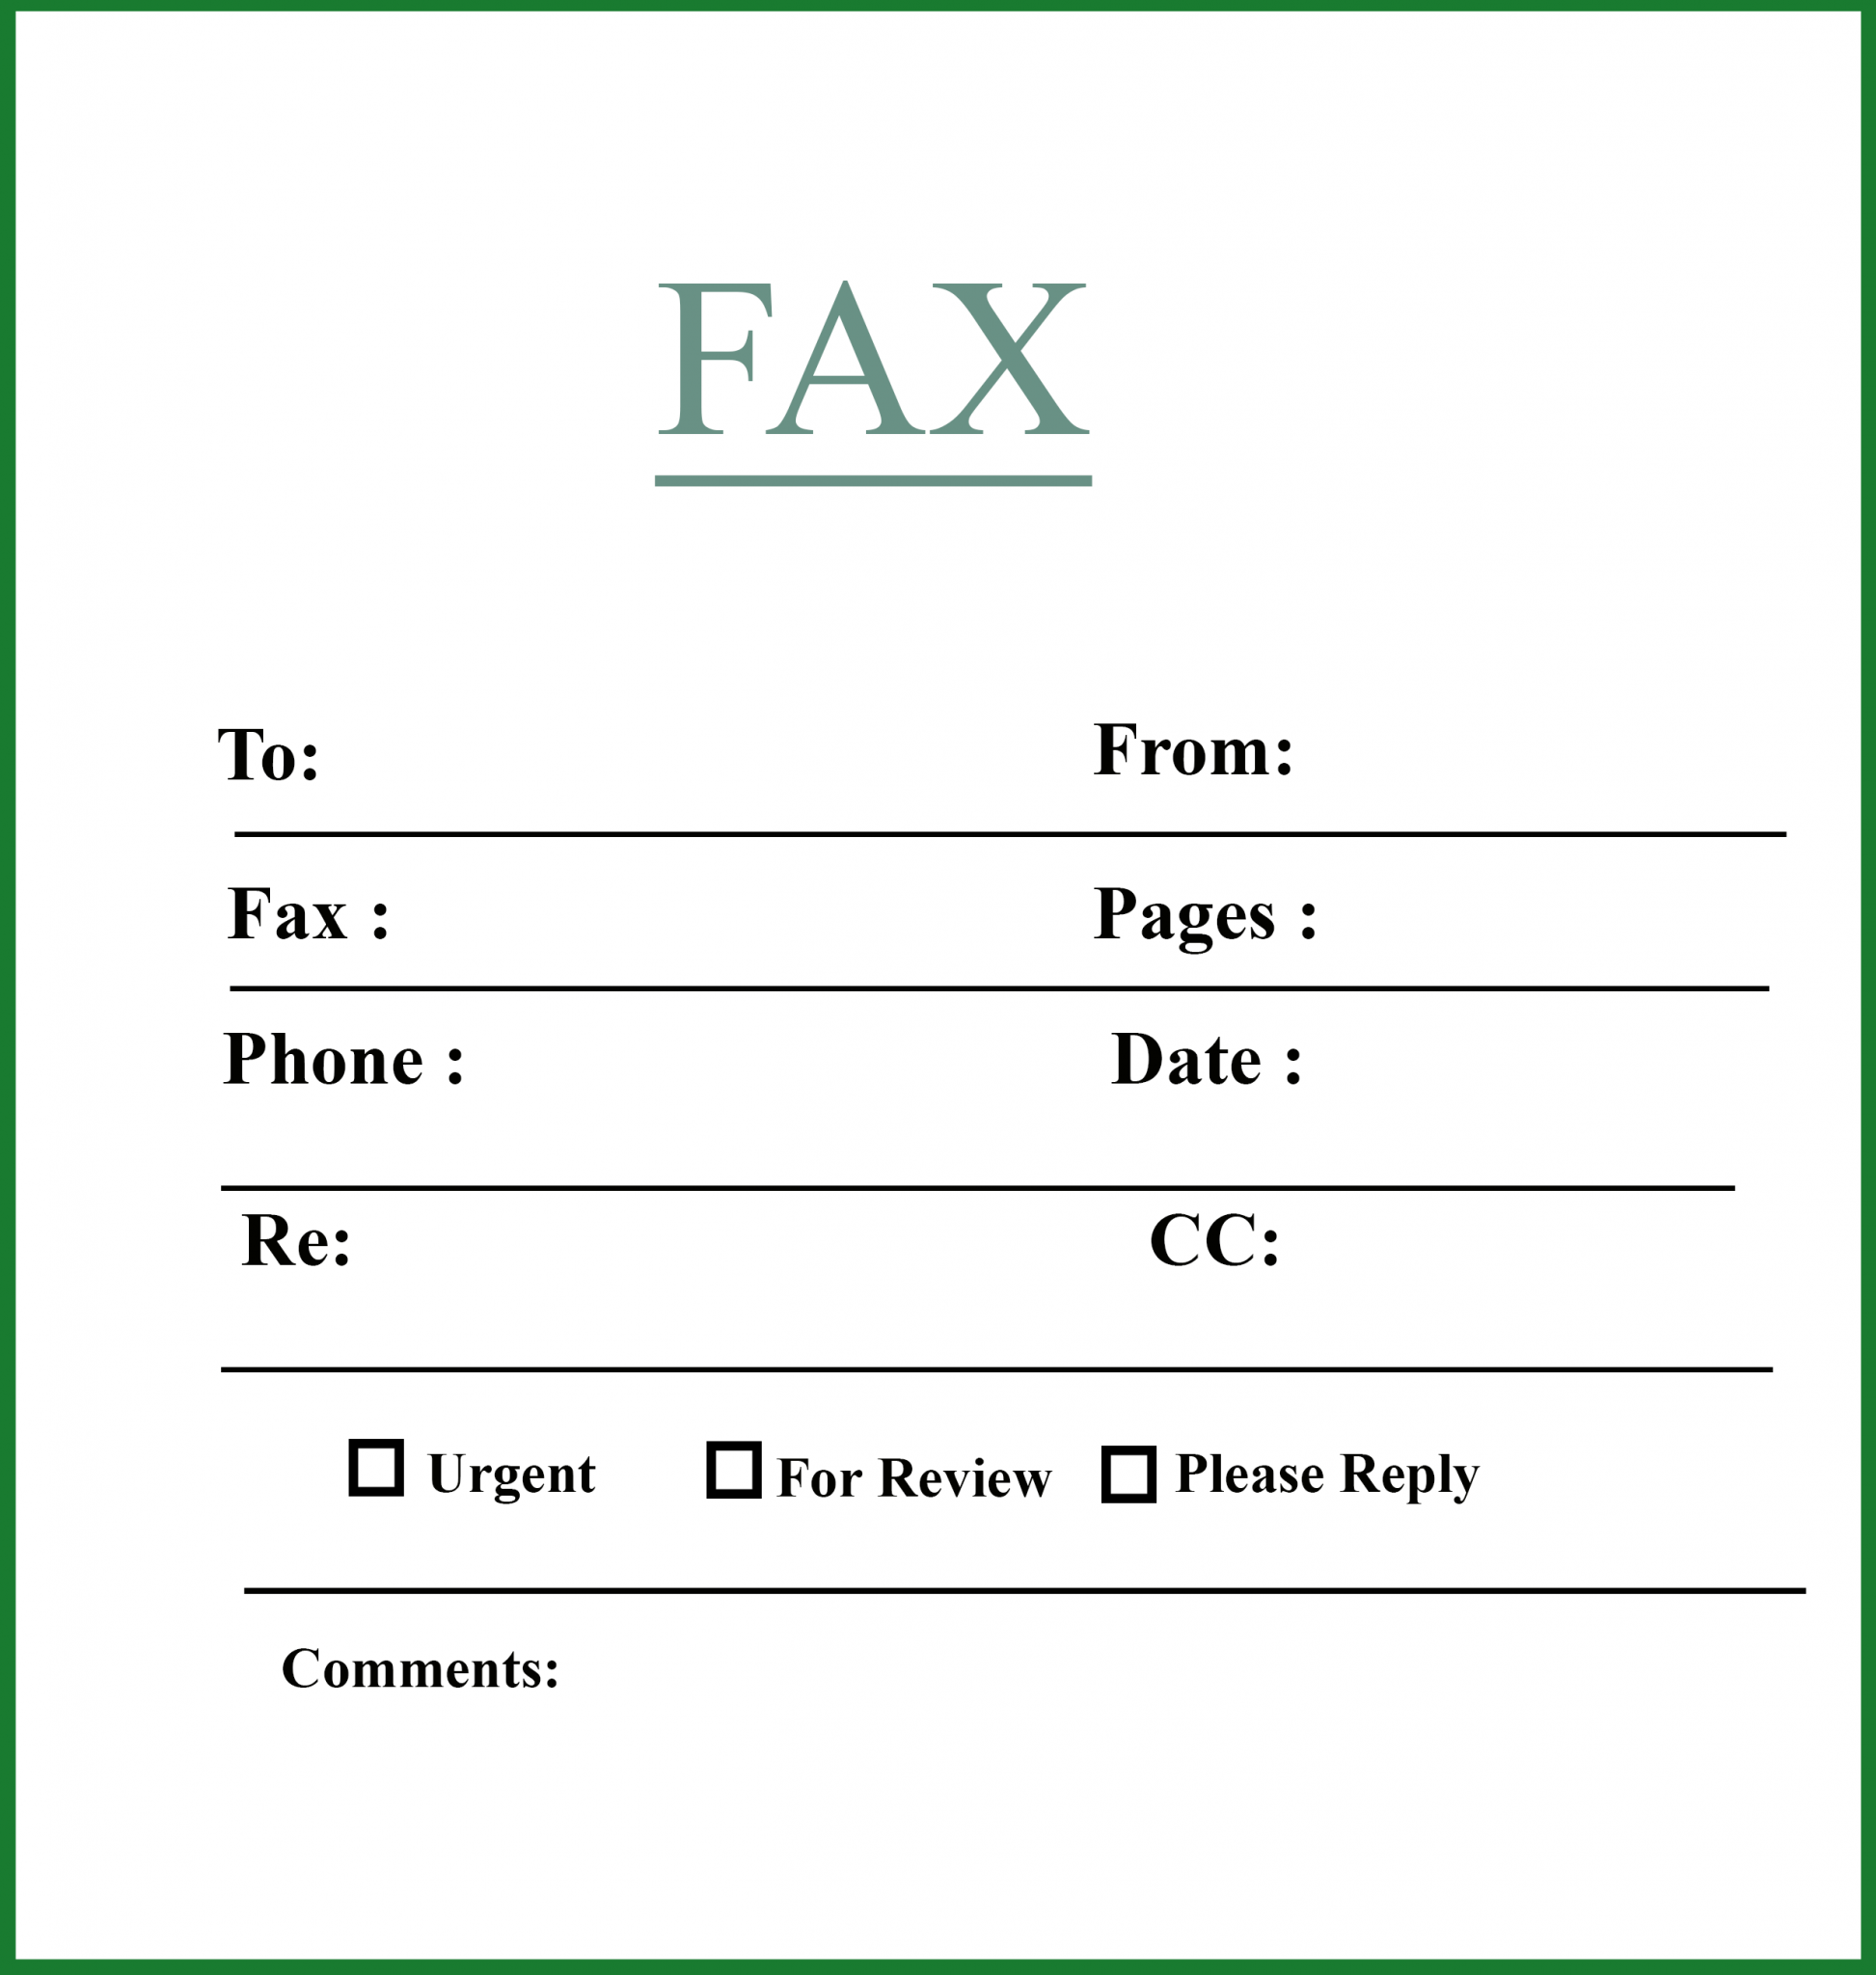 fax cover sheets printable free